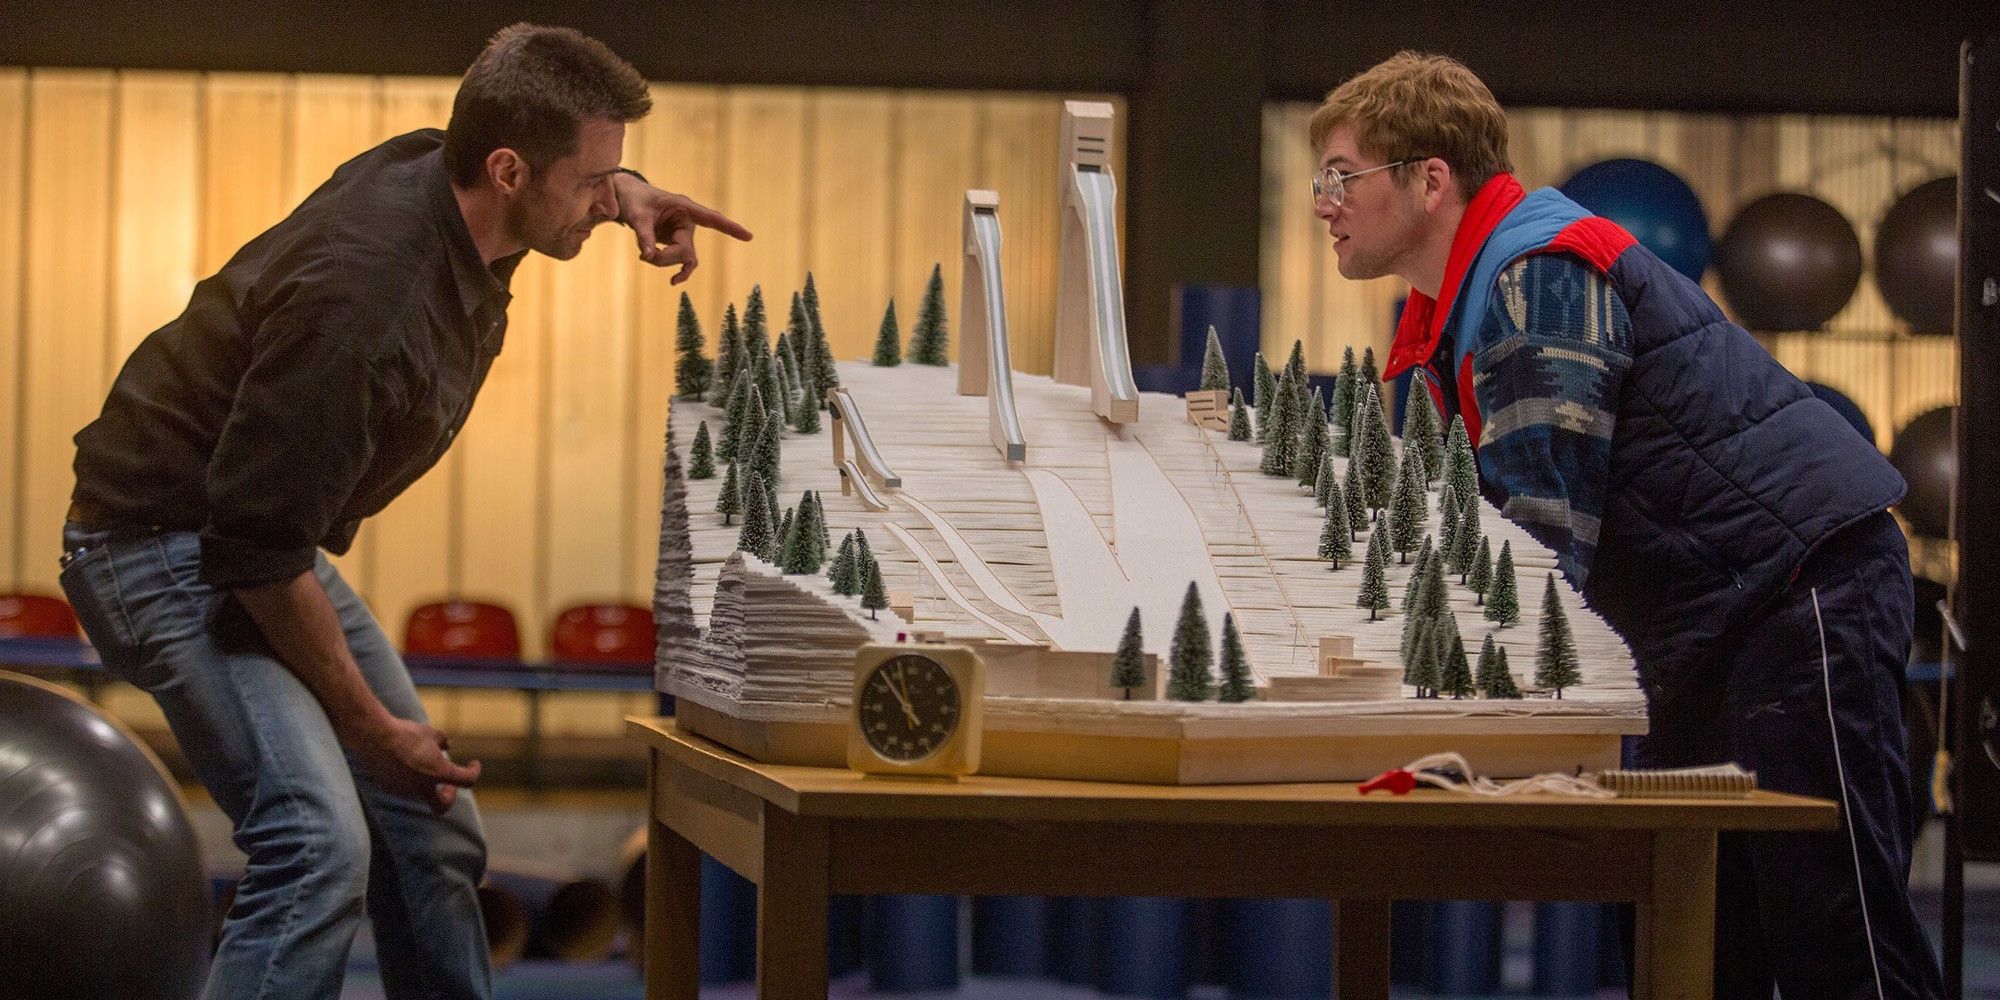 Bronson Peary (Hugh Jackman) and Eddie the Eagle (Taron Egerton) looking at a model of the ski jump.